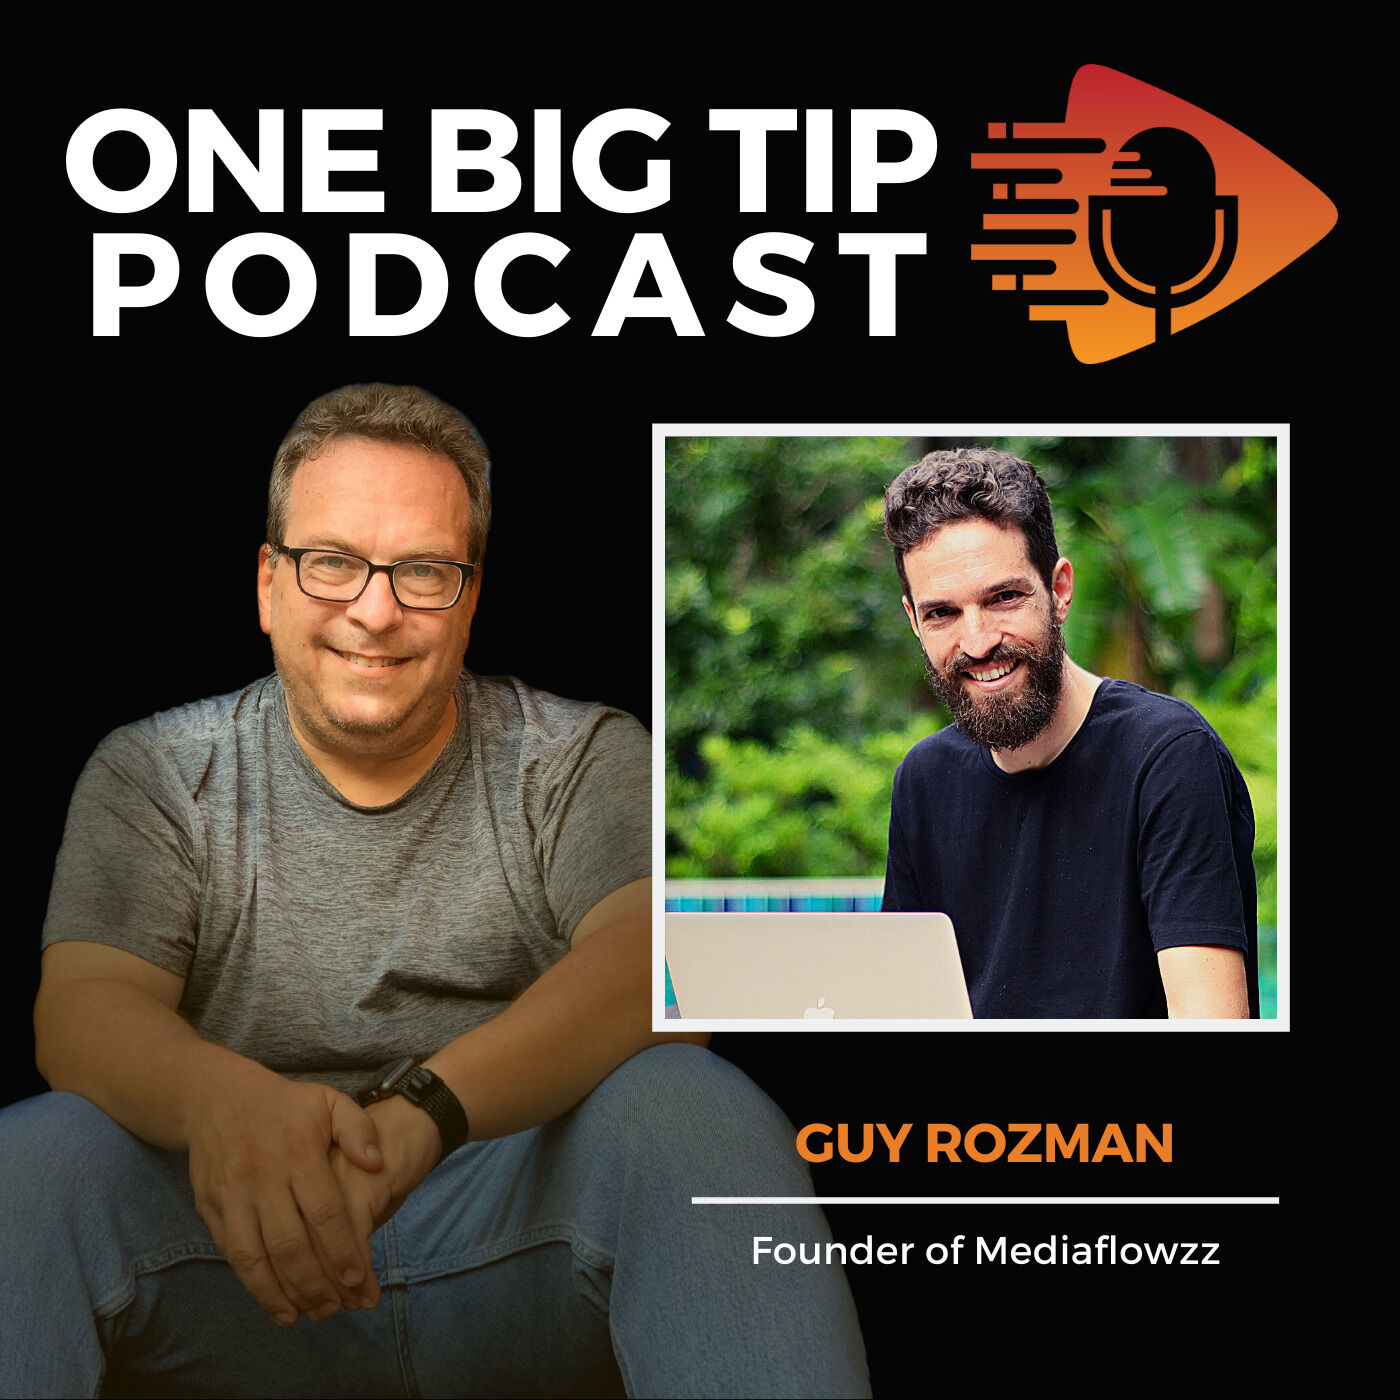 Artwork for podcast The One Big Tip Podcast with Jeff Mendelson